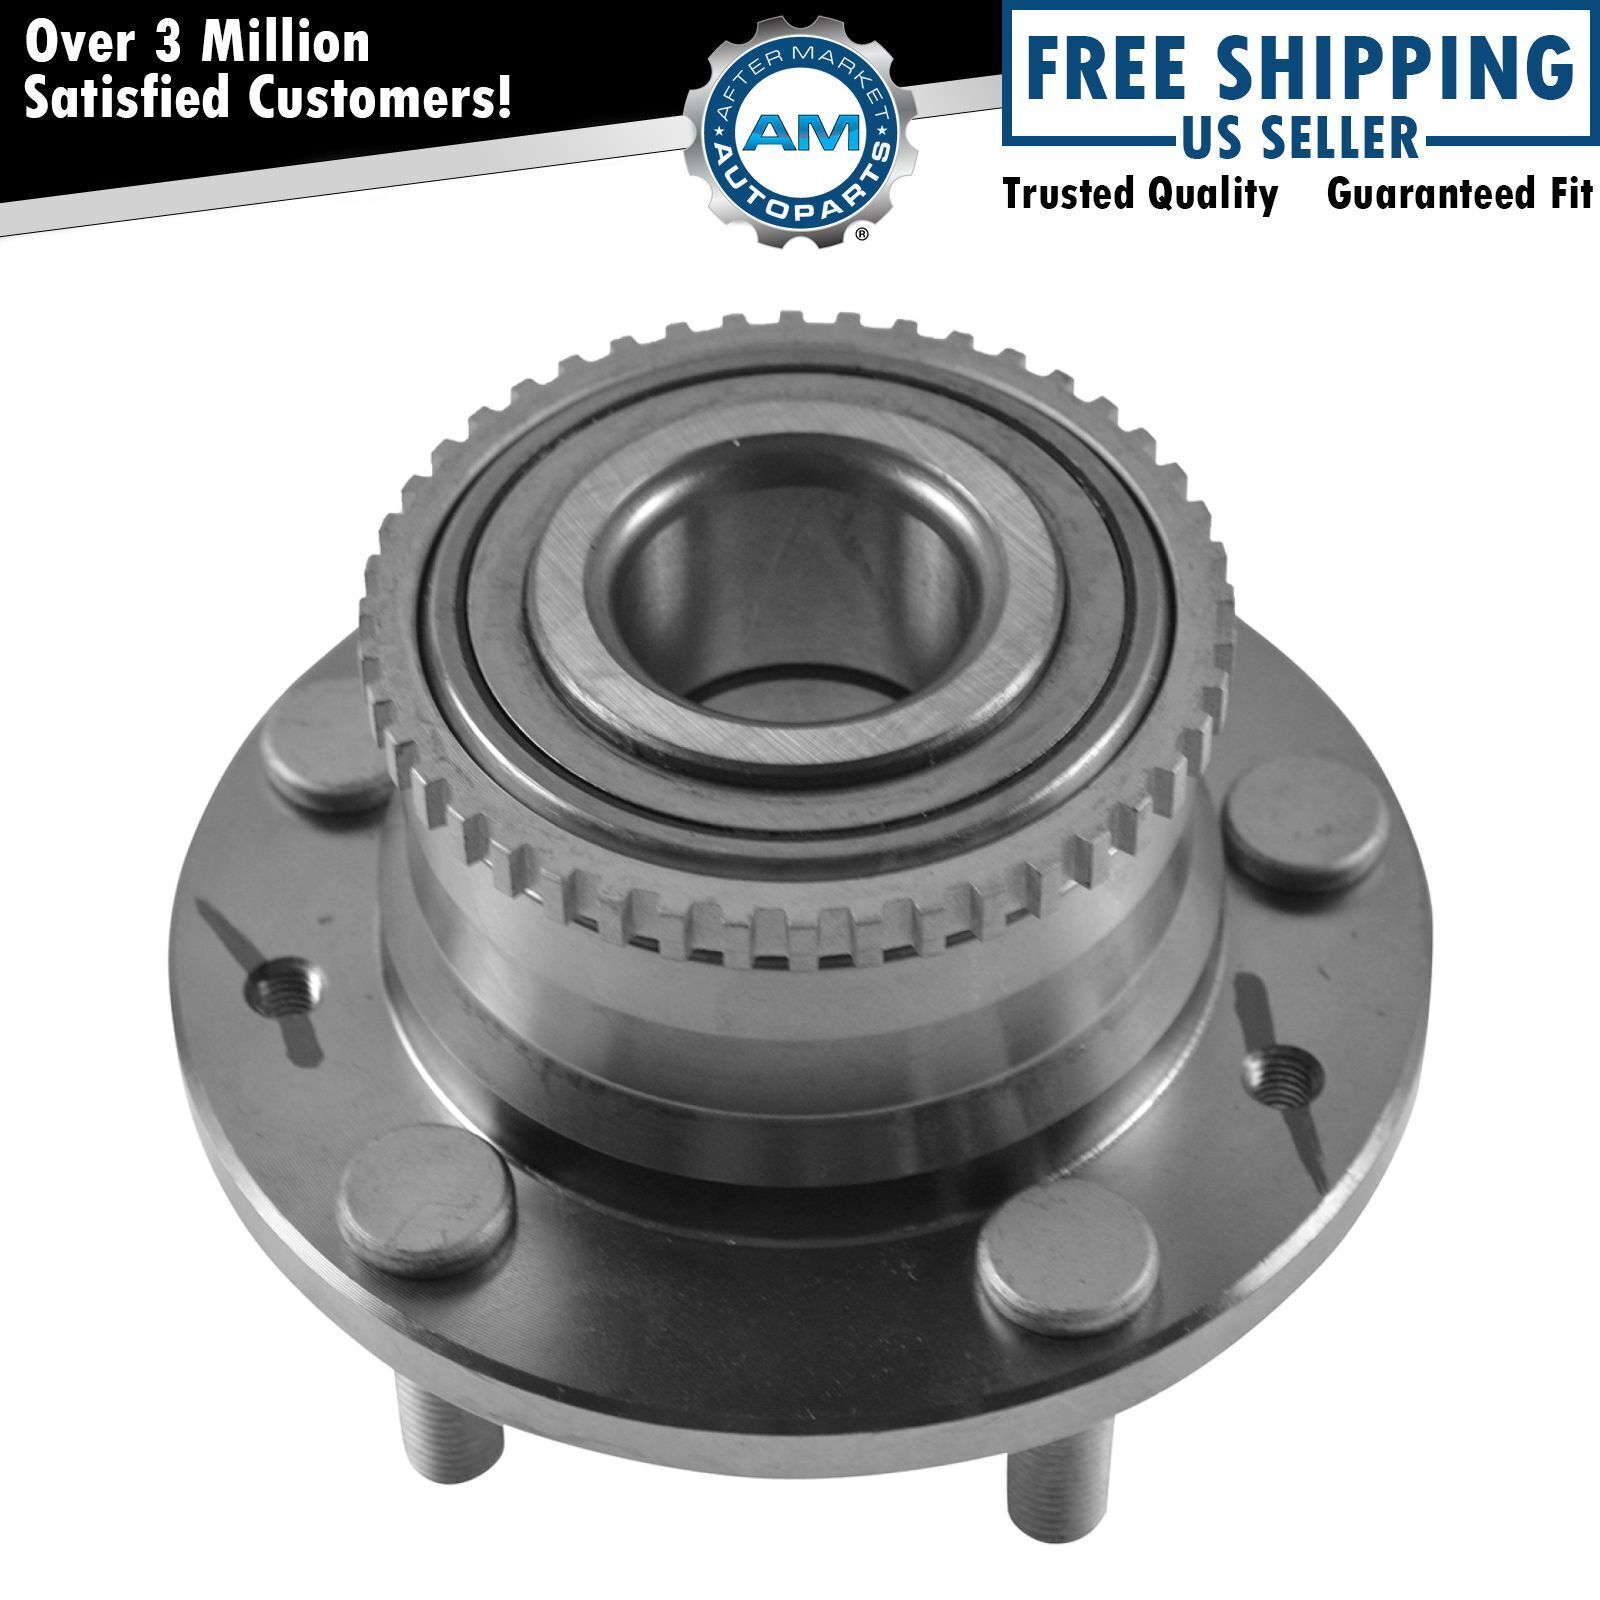 Wheel Bearing and Hub Assembly for Mazda MPV Millenia Protege w/ ABS